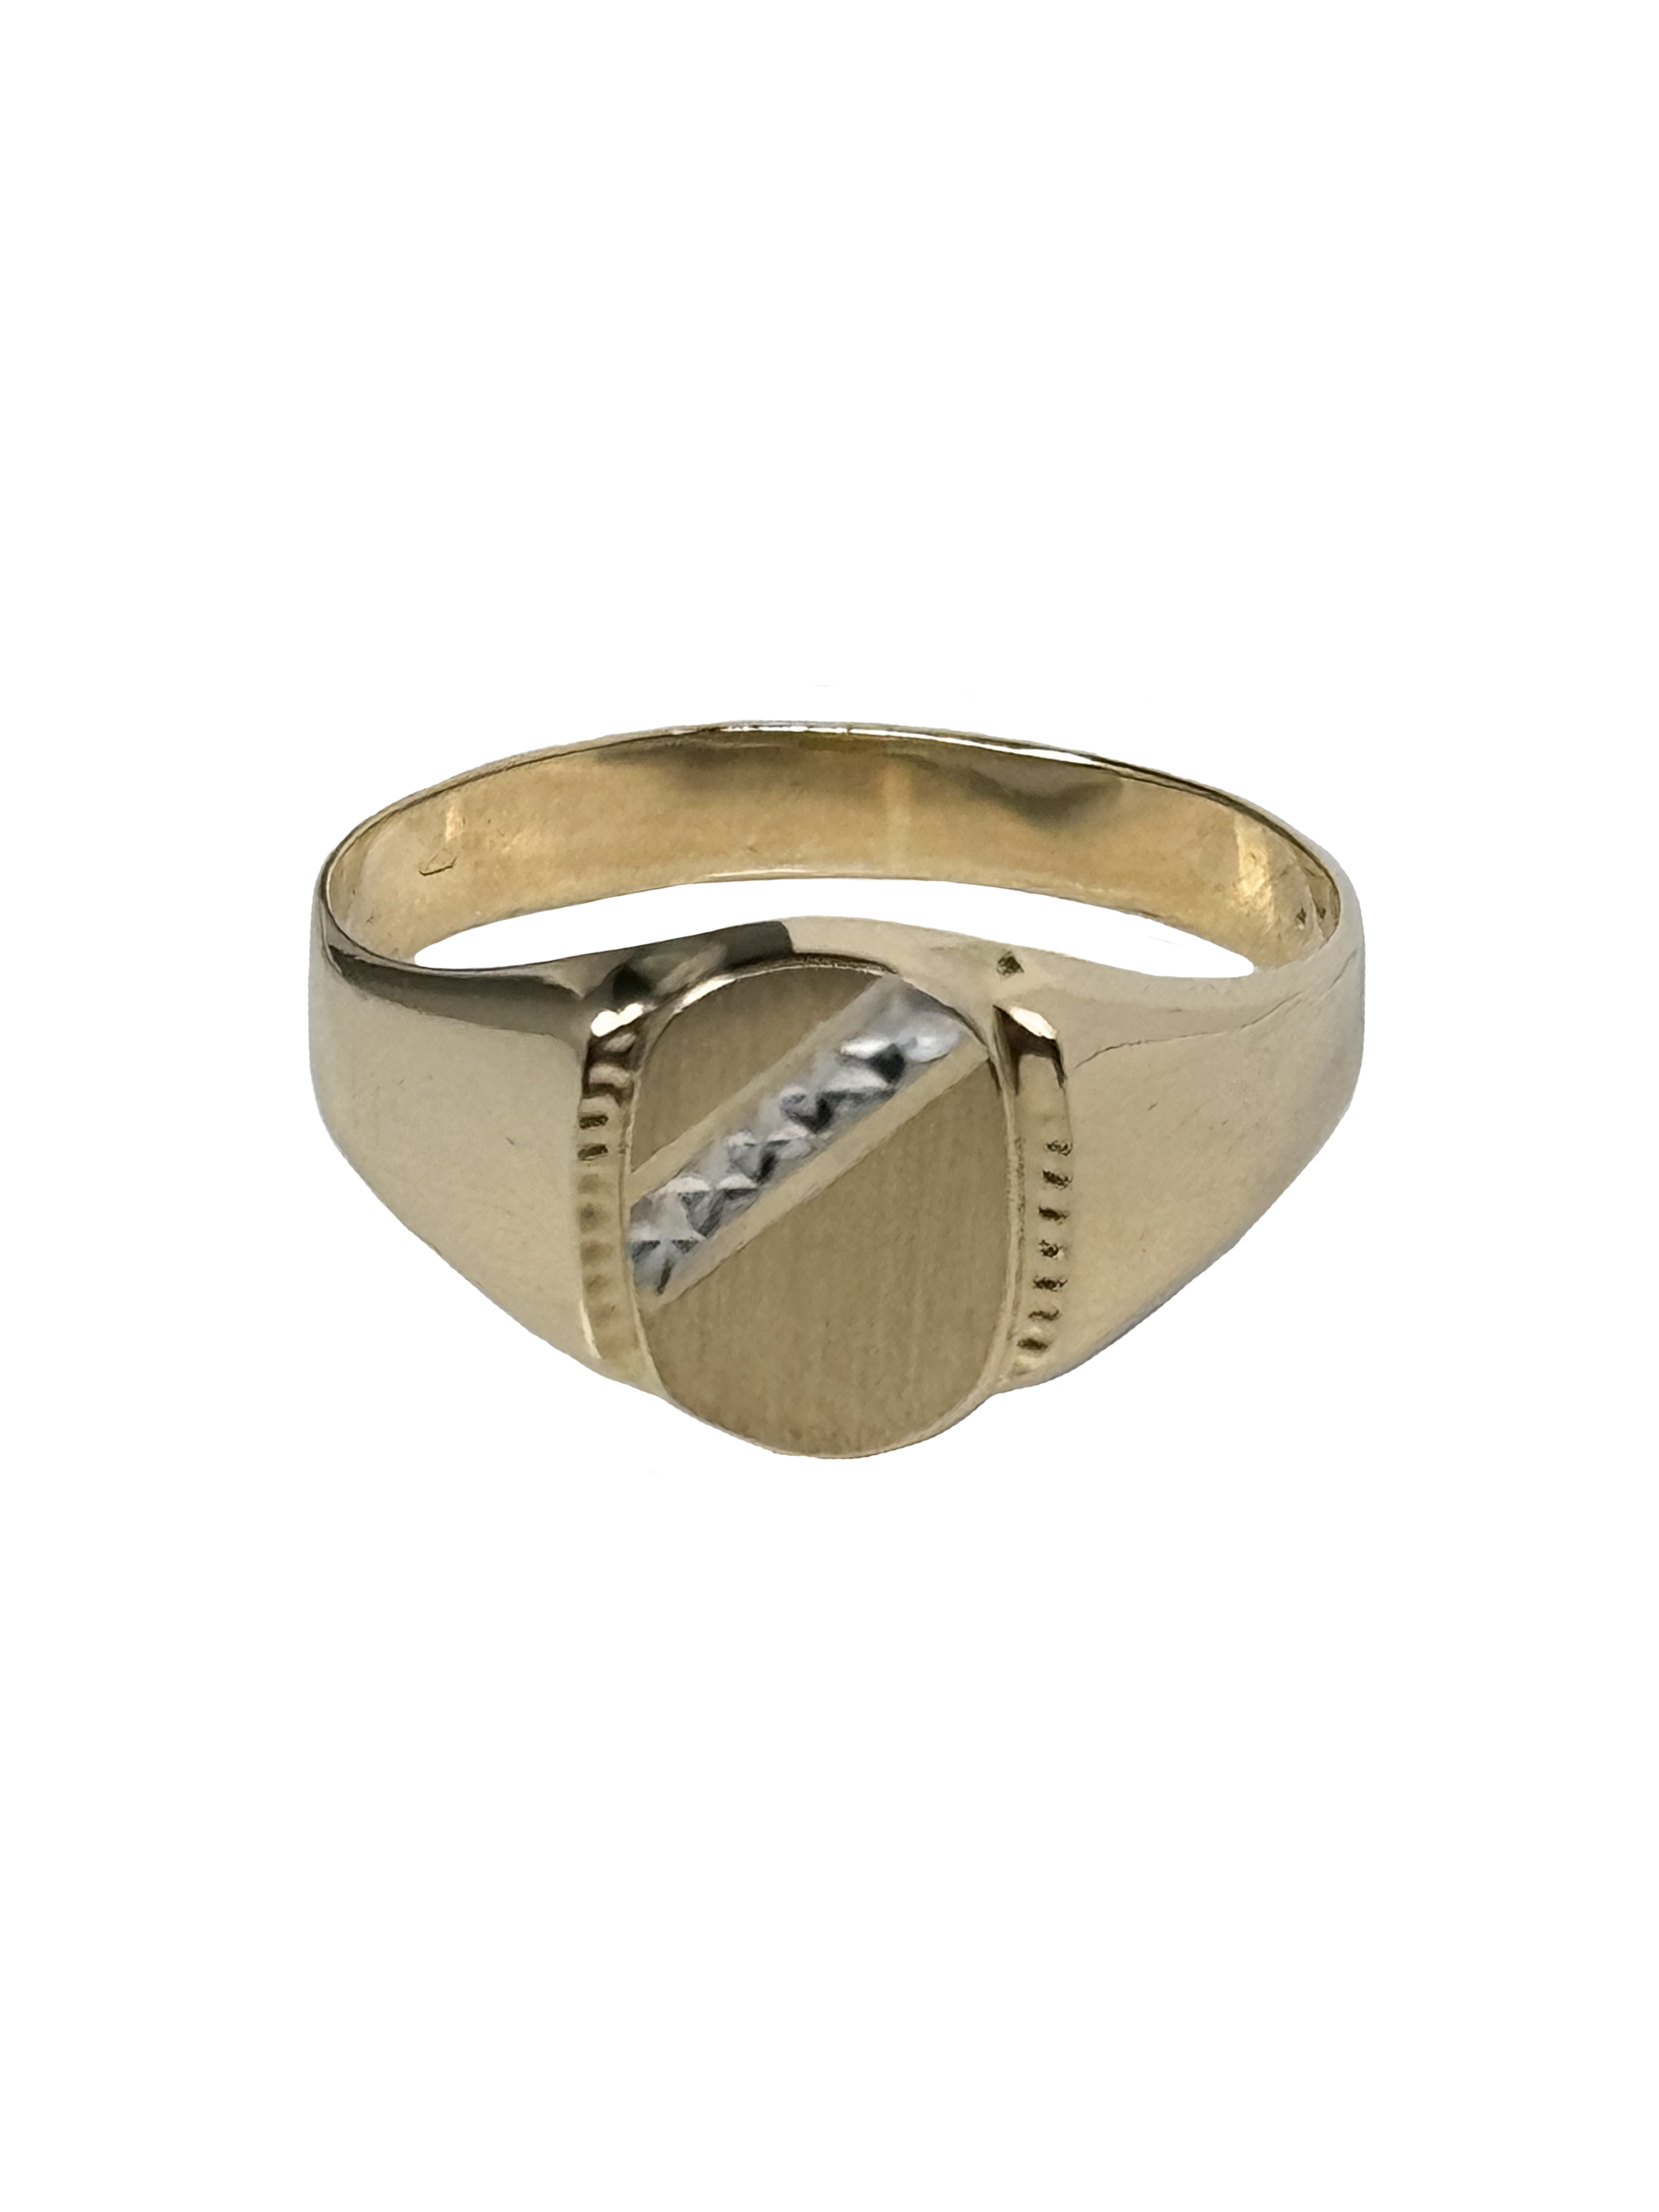 Gold children's signet ring made of combined gold